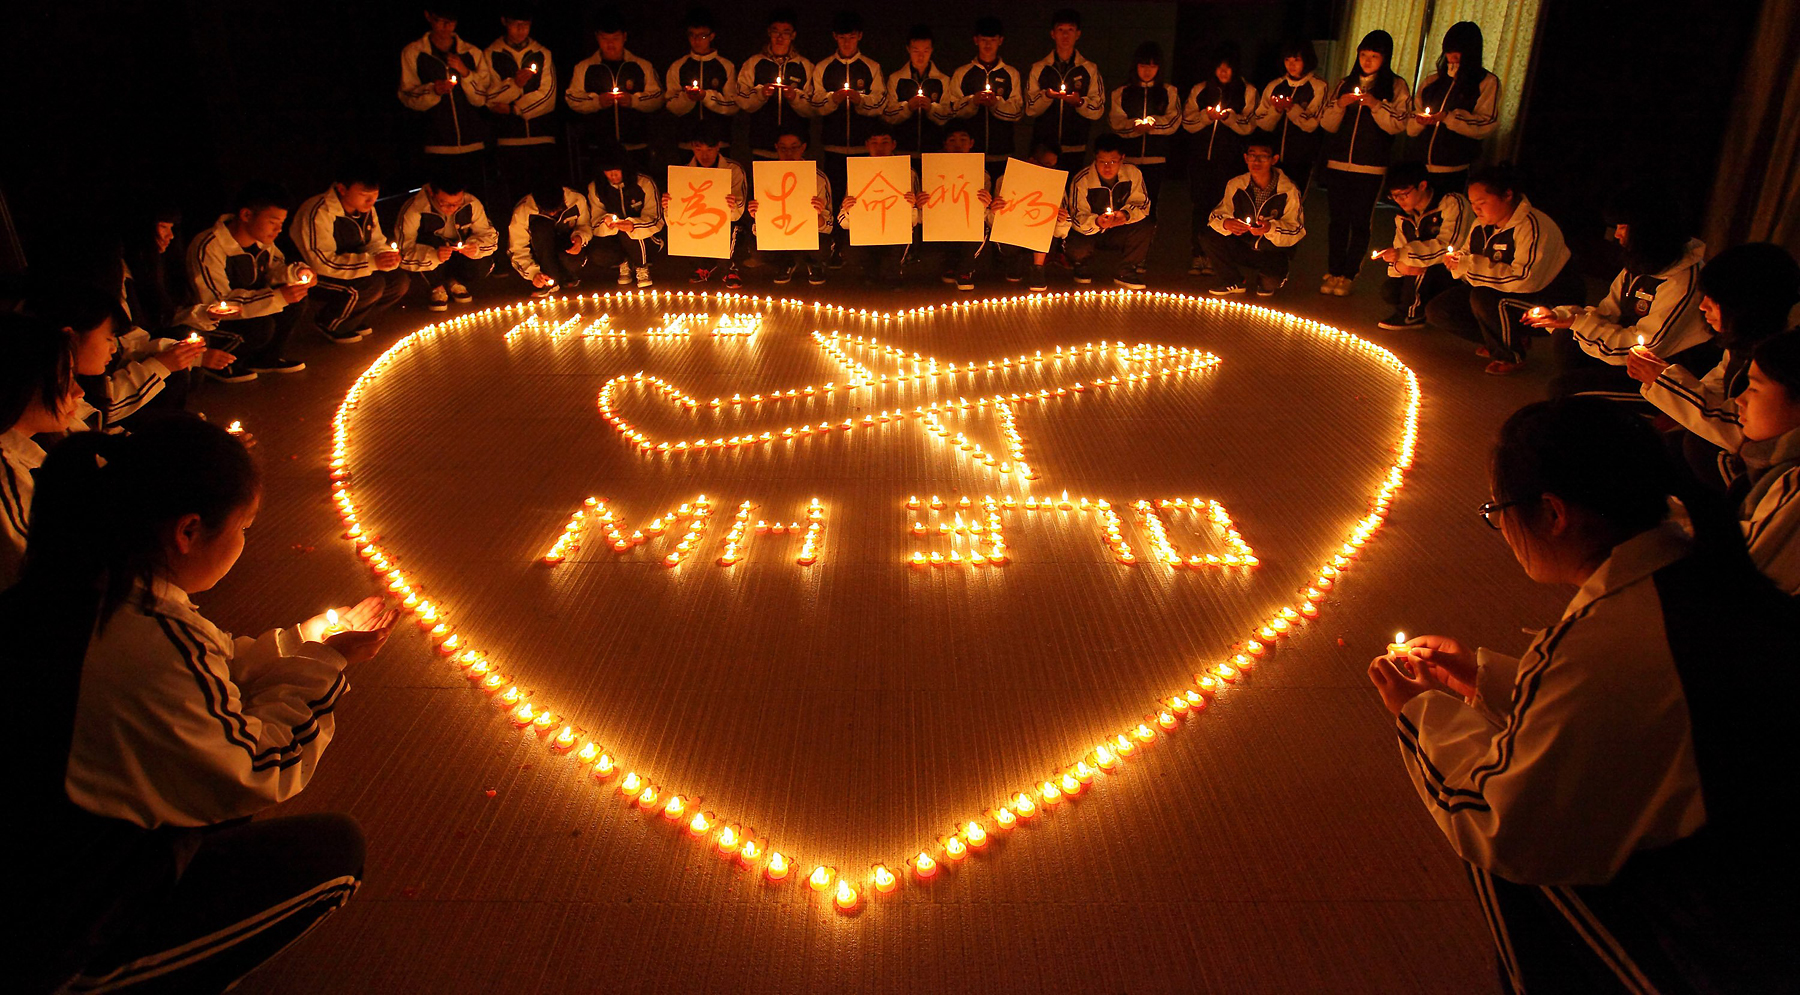 Students from an international school in the eastern Chinese city of Zhuji hold a candlelight vigil for the passengers on the missing Malaysia Airlines plane on March 10, 2014 (ChinaFotoPress/Getty Images)